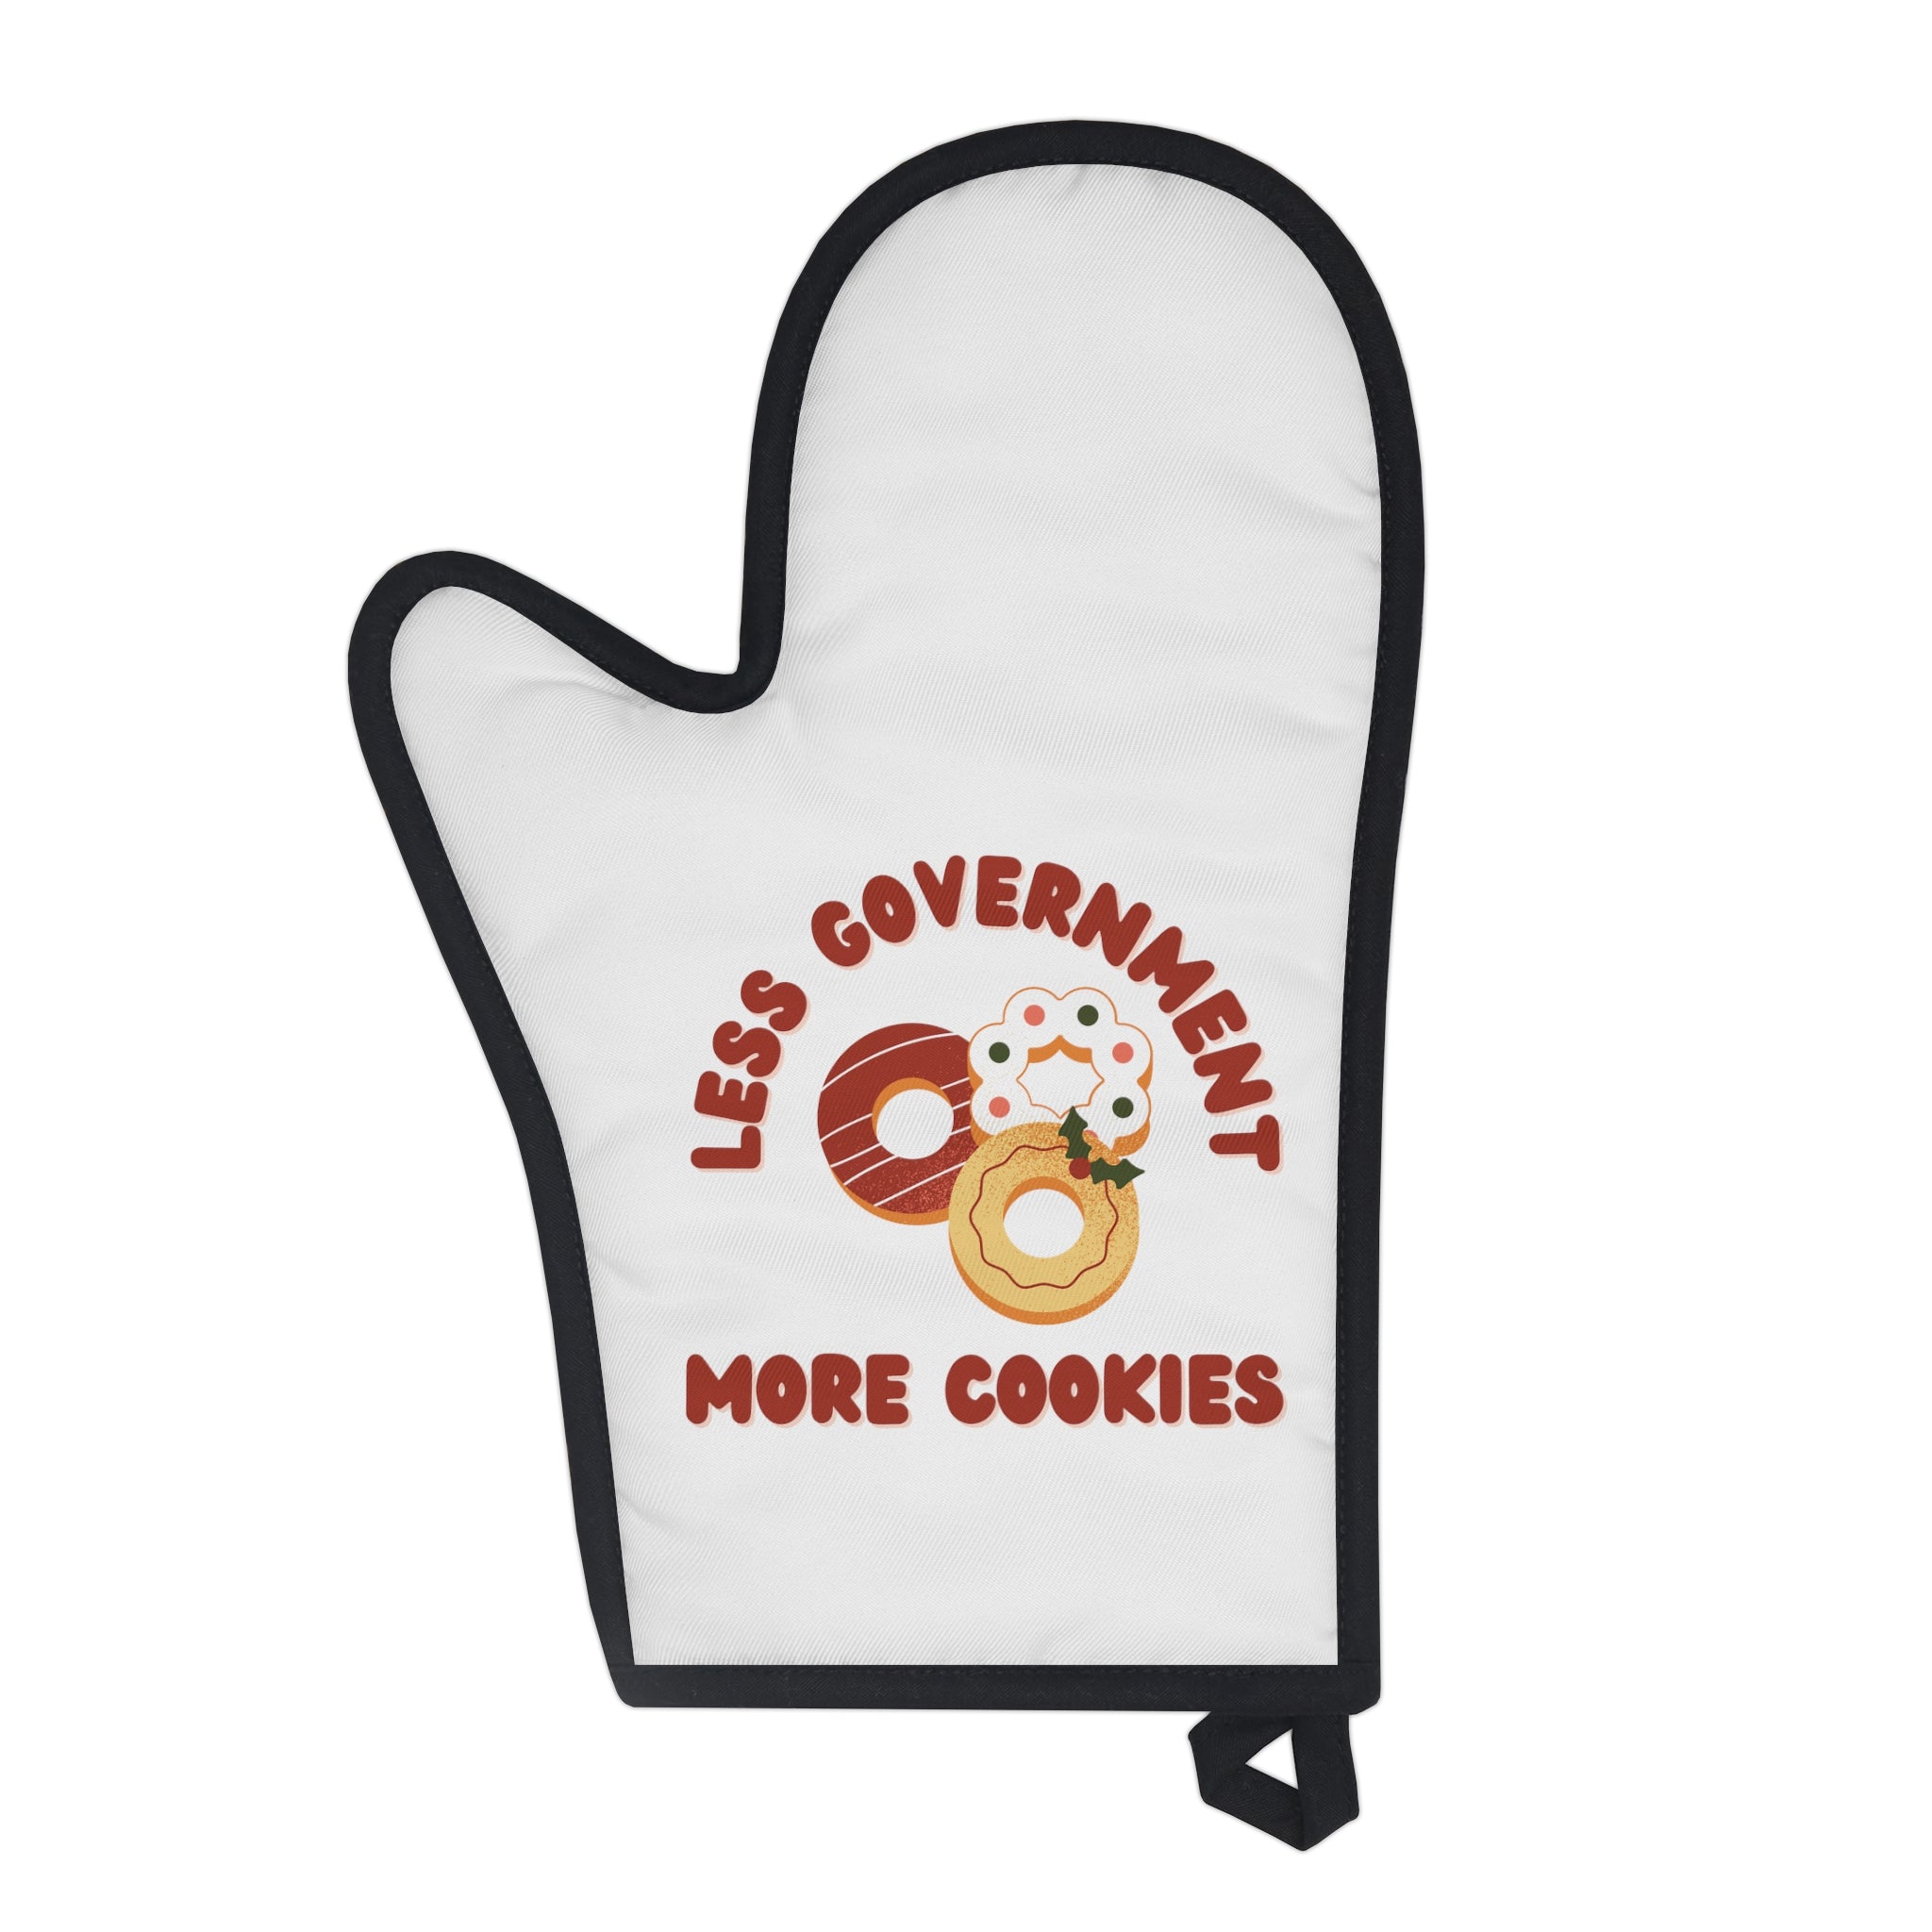 Less Government More Cookies Oven Mitt